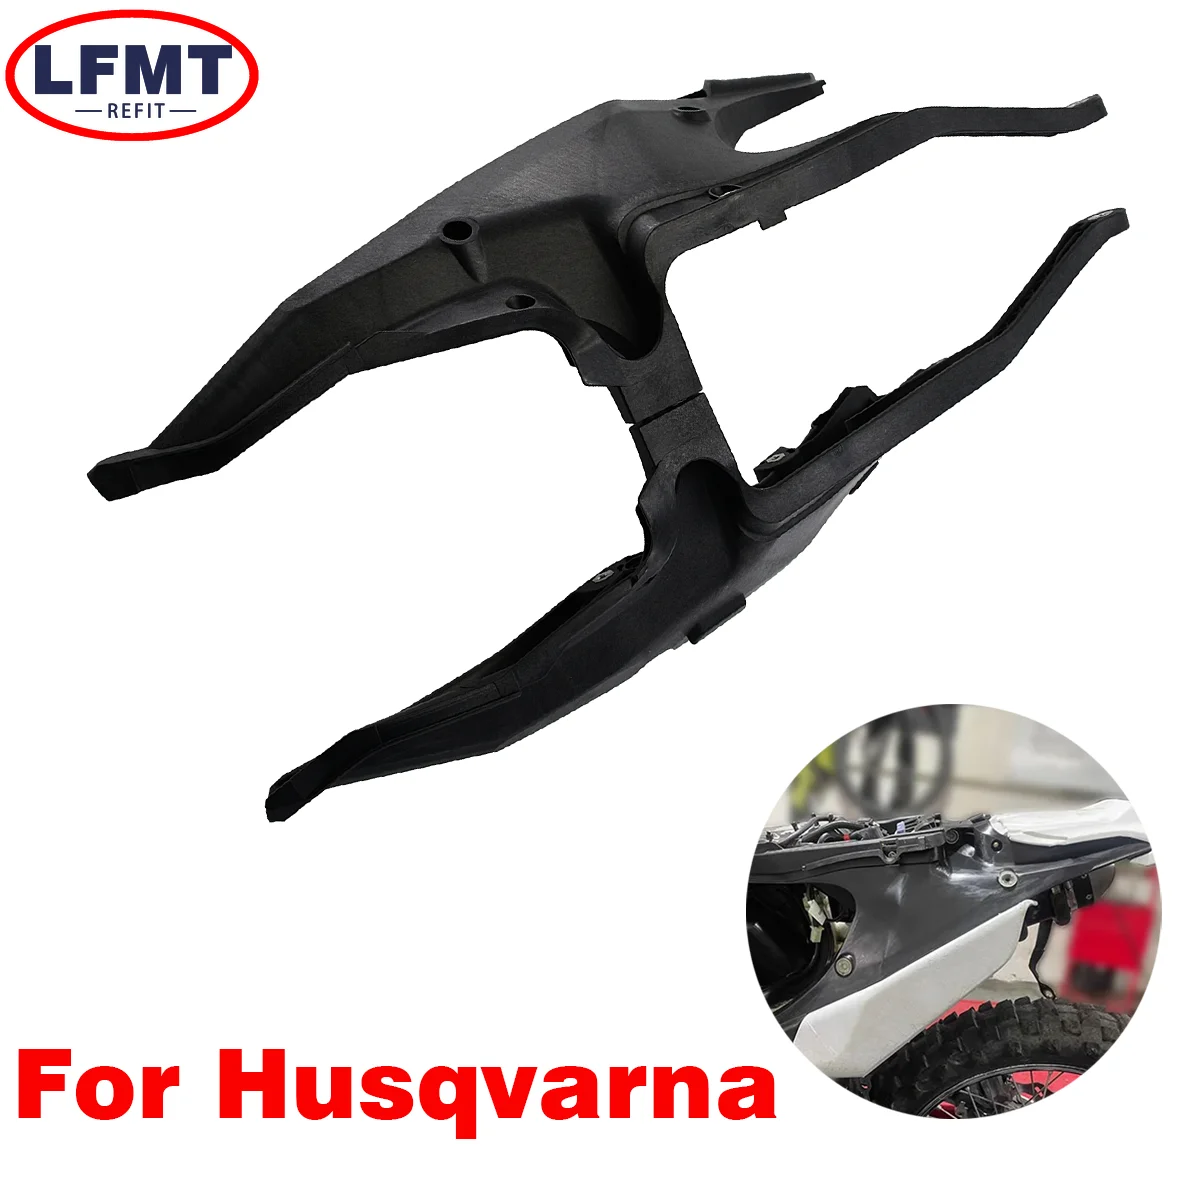 

For HUSQVARNA FC FE FS FX TC TE TX 250 350 450 19-22 New Motorcycle Strengthen Subframe Rear Seat Support Frame Tailstock Mount